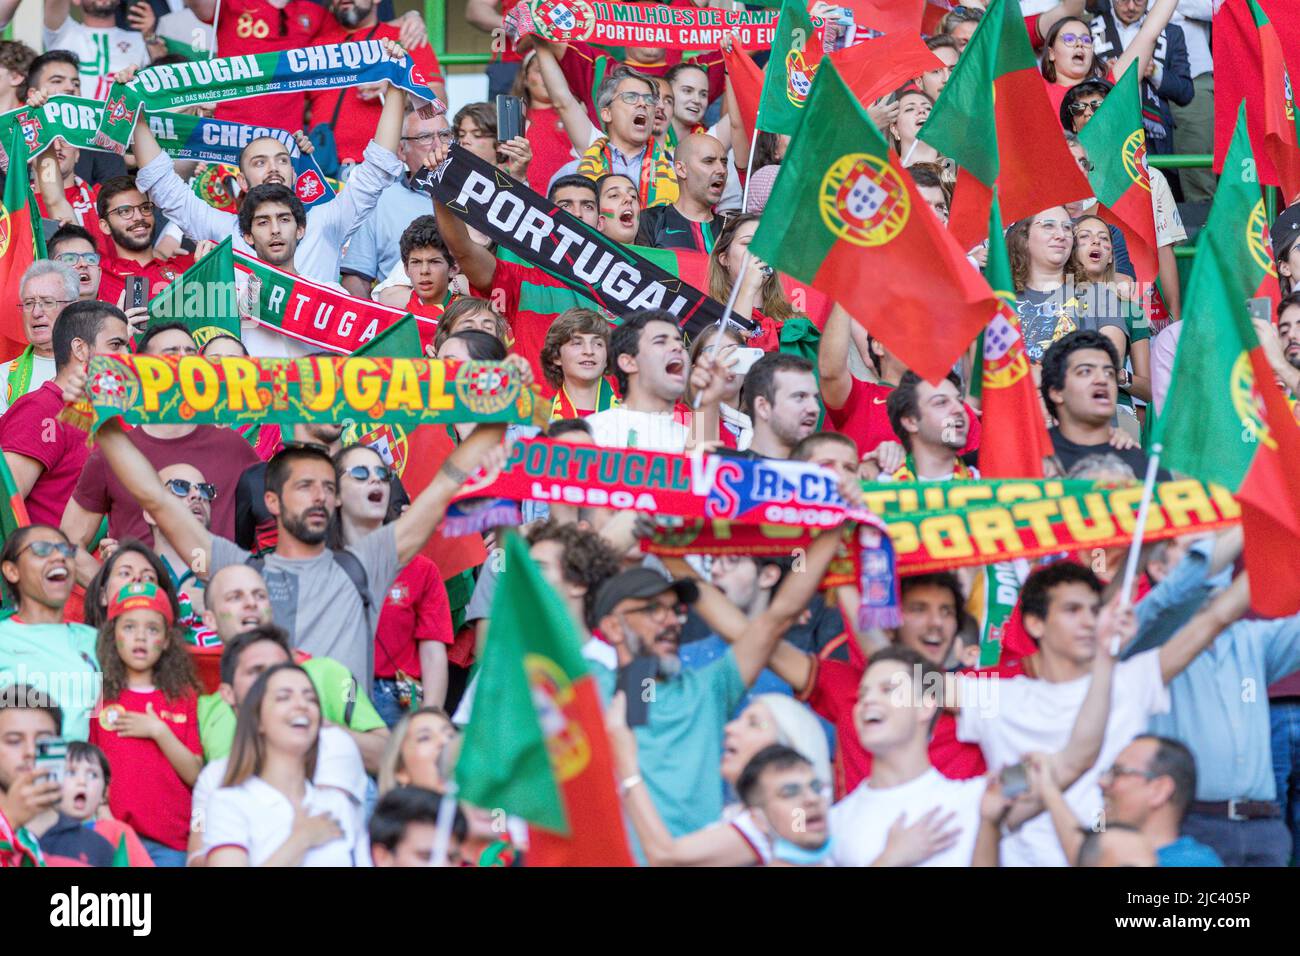 June 09, 2022. Lisbon, Portugal. Portugal supporters during the UEFA Nations League Final Tournament between Portugal and Czechia Credit: Alexandre de Sousa/Alamy Live News Stock Photo